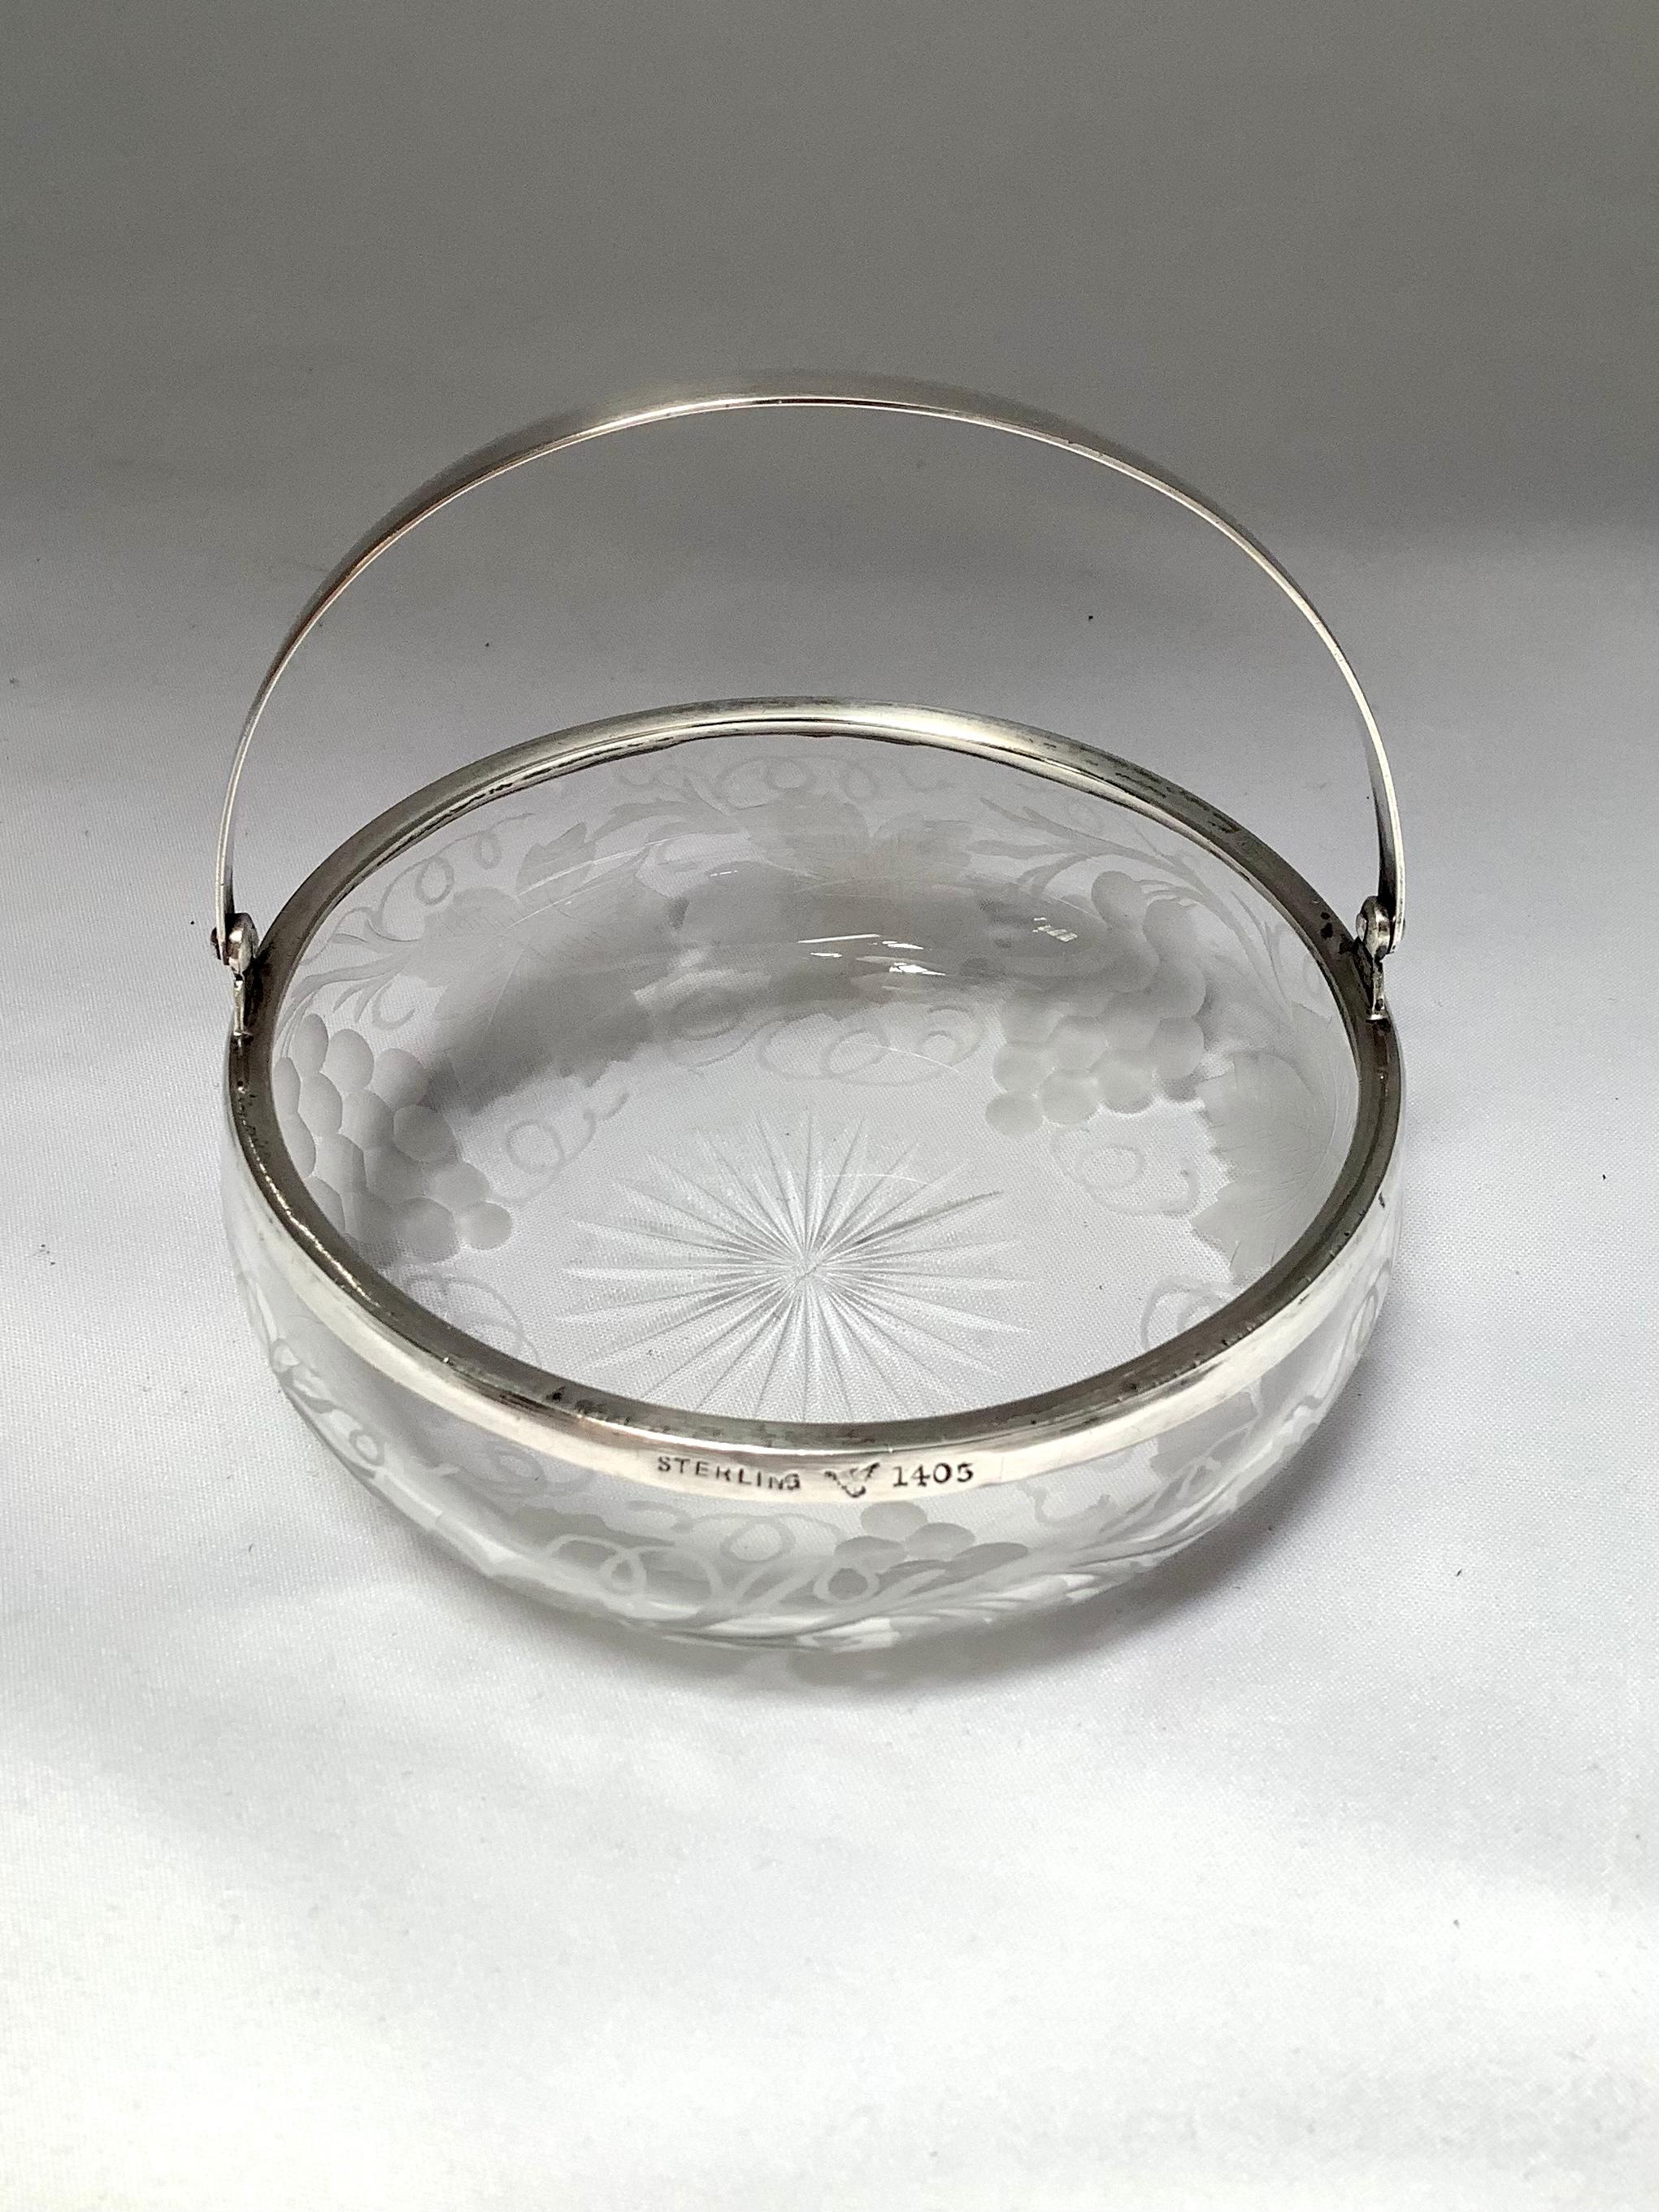 Crystal candy dish with beautiful etched grapevines throughout. The charming dish has a sterling silver handle that is clearly marked.